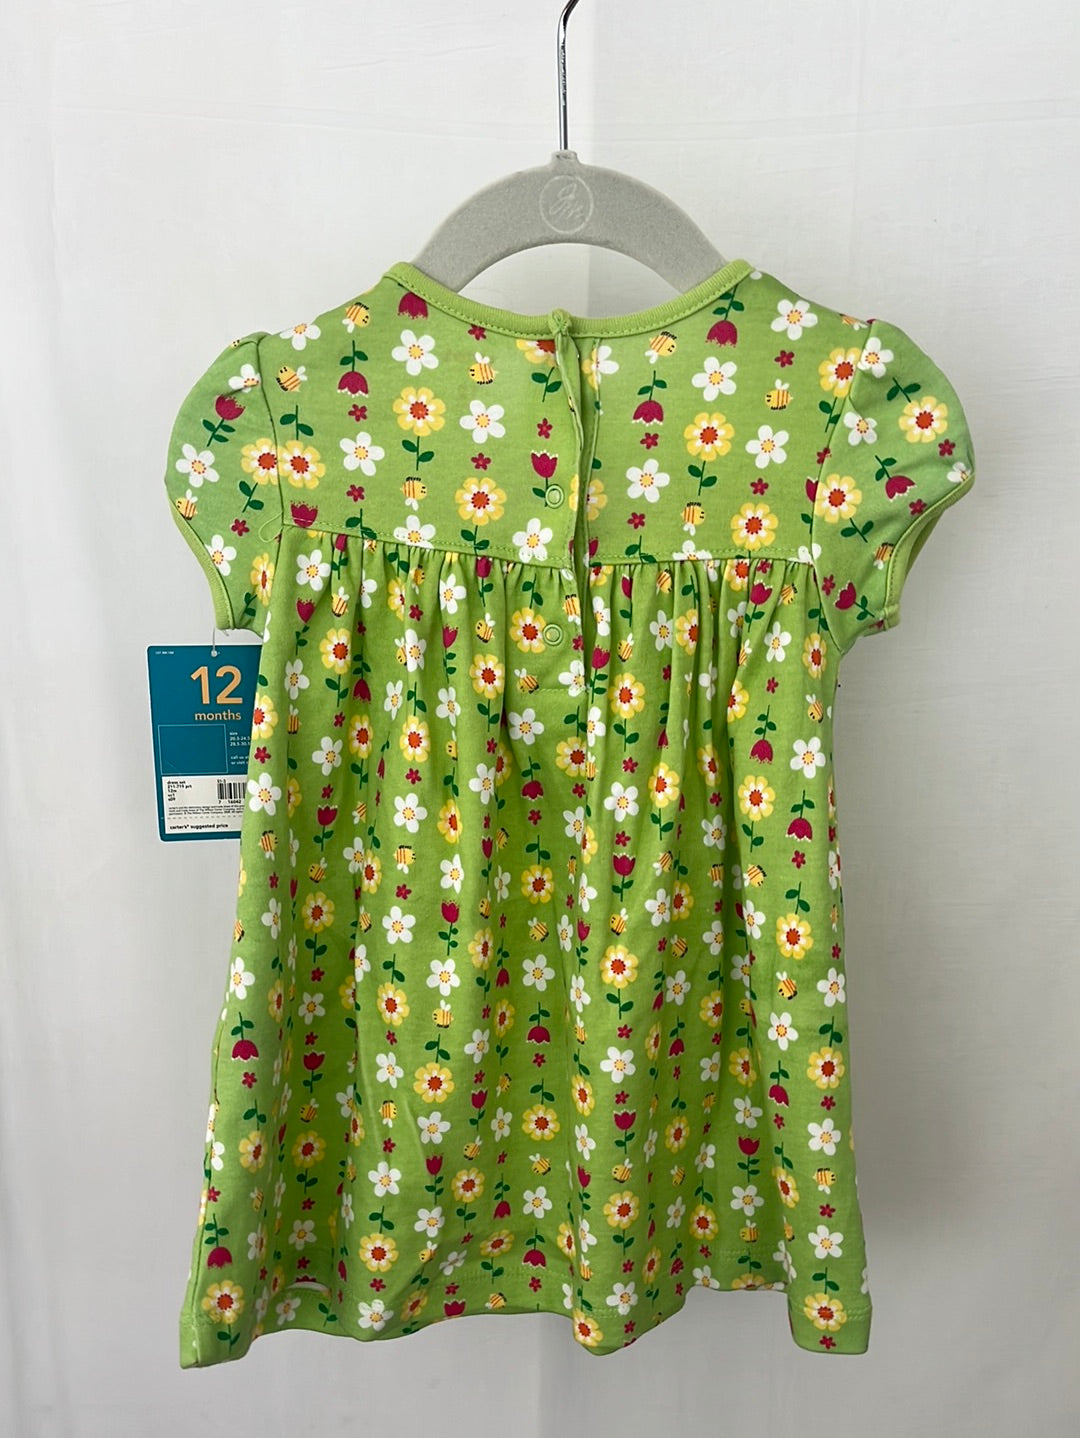 NWT -- CARTER'S Green Floral Dress & Bloomers 2-piece Set -- 12m